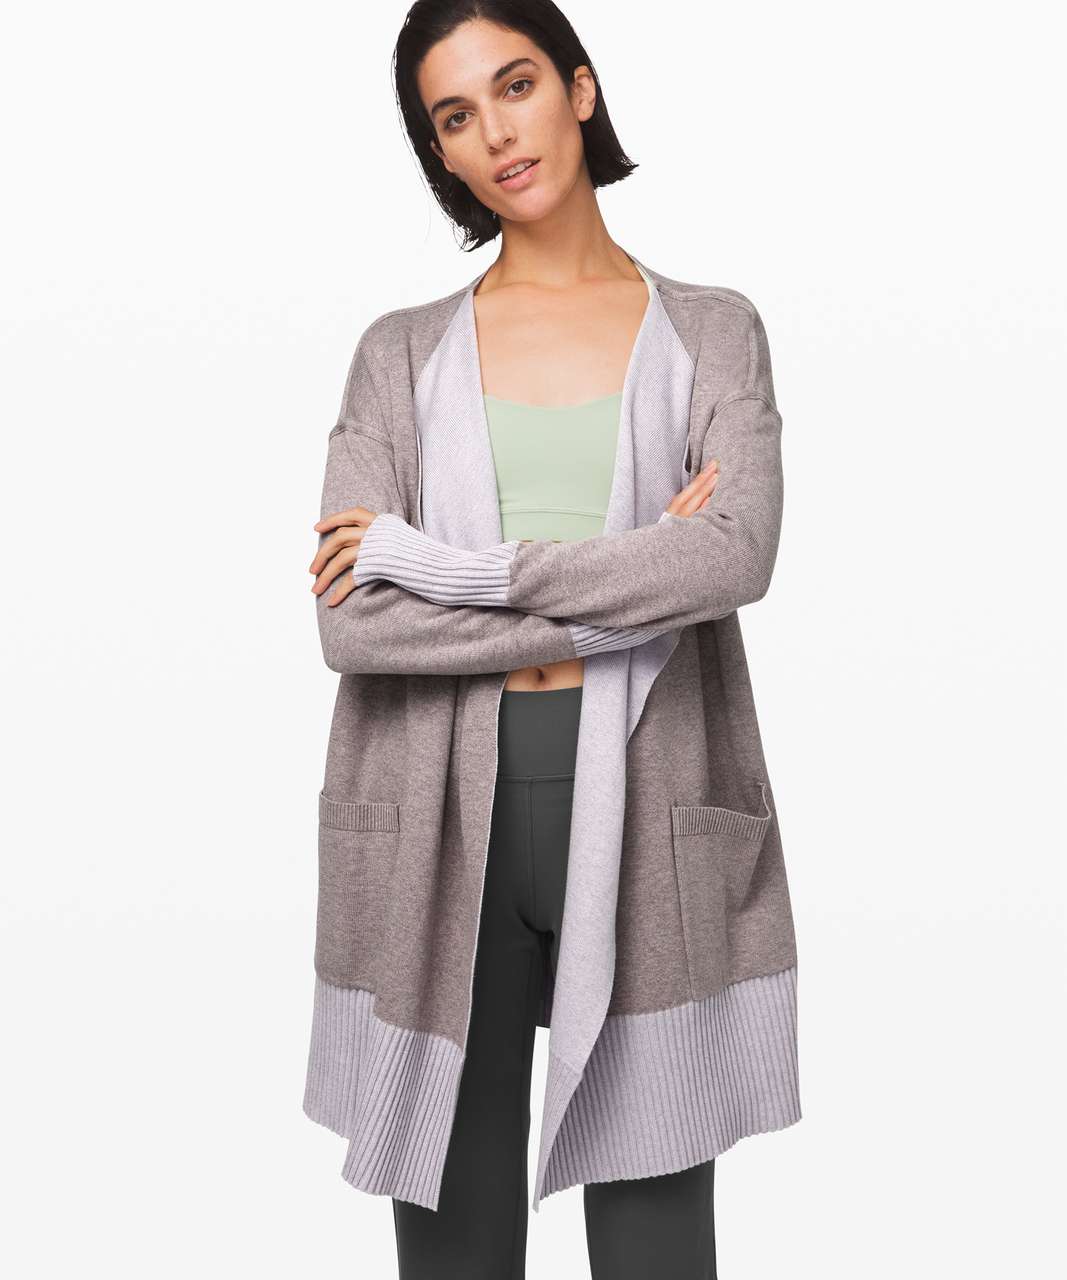 Lululemon Still Lotus Wrap *Reversible - Heathered Silver Lilac / Heathered Frosted Mulberry